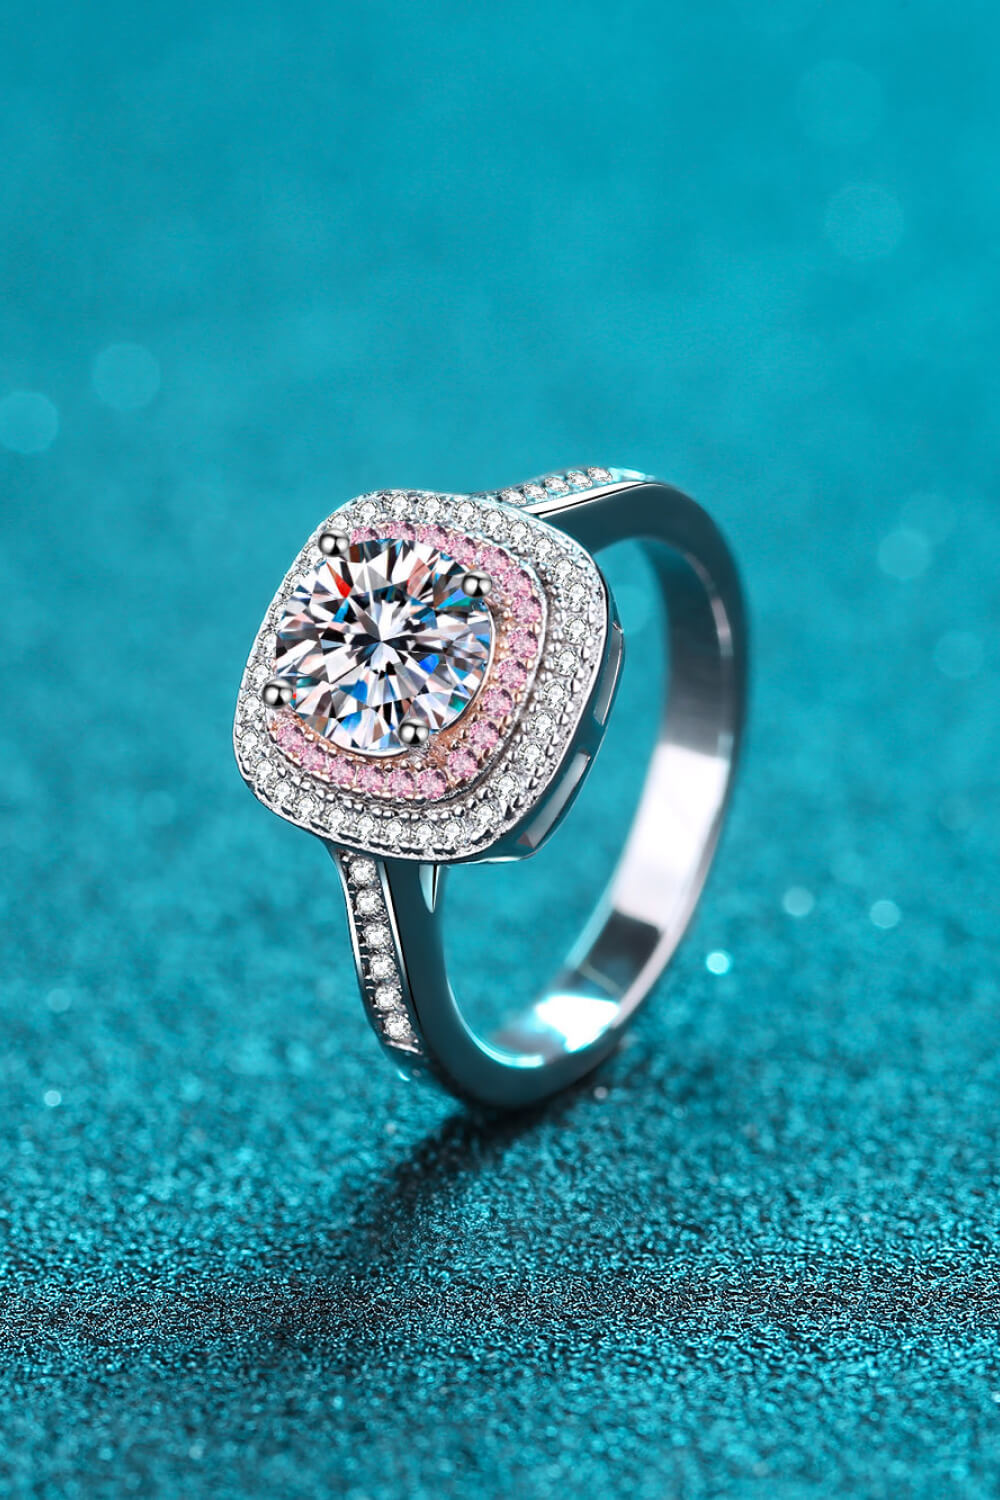 Need You Now Moissanite Ring - Cheeky Chic Boutique